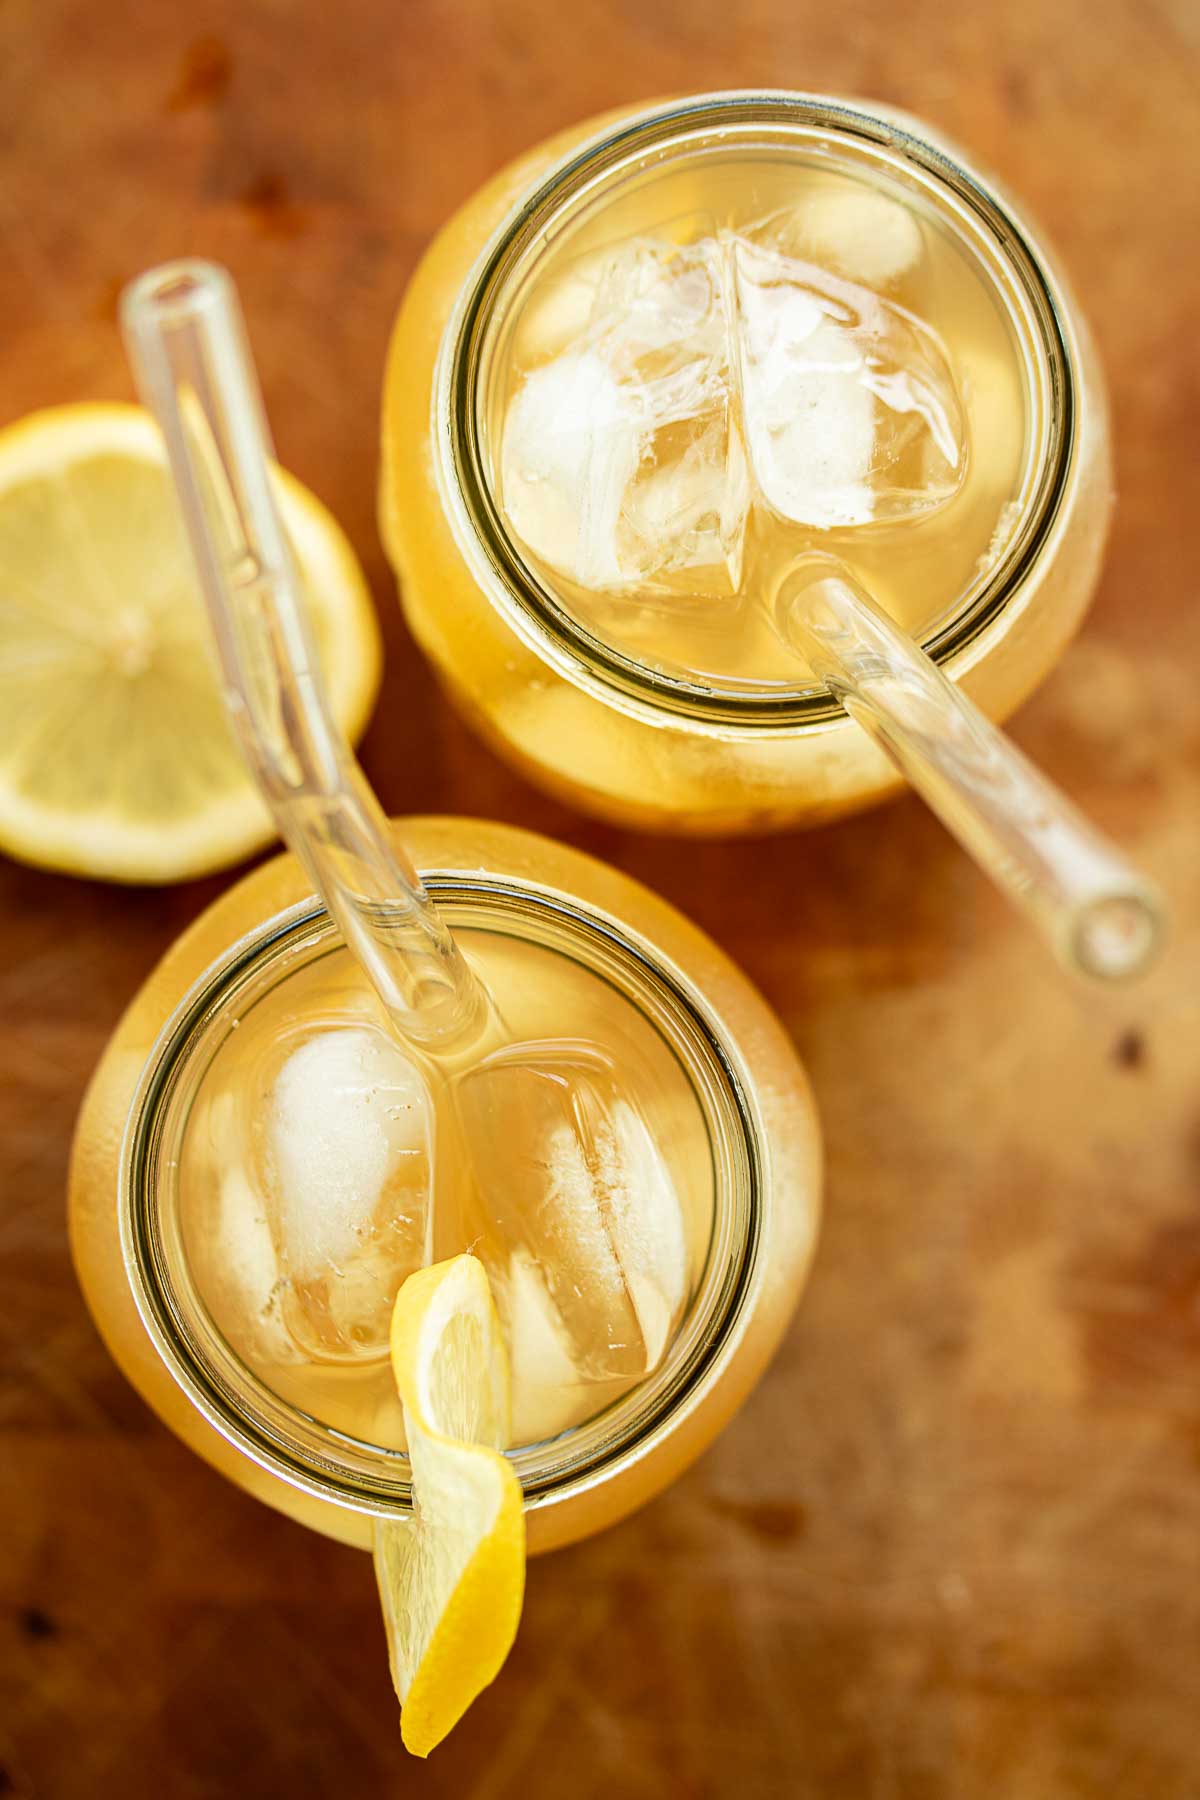 Lemonade from above, with glass straws and lemons slices decorating.